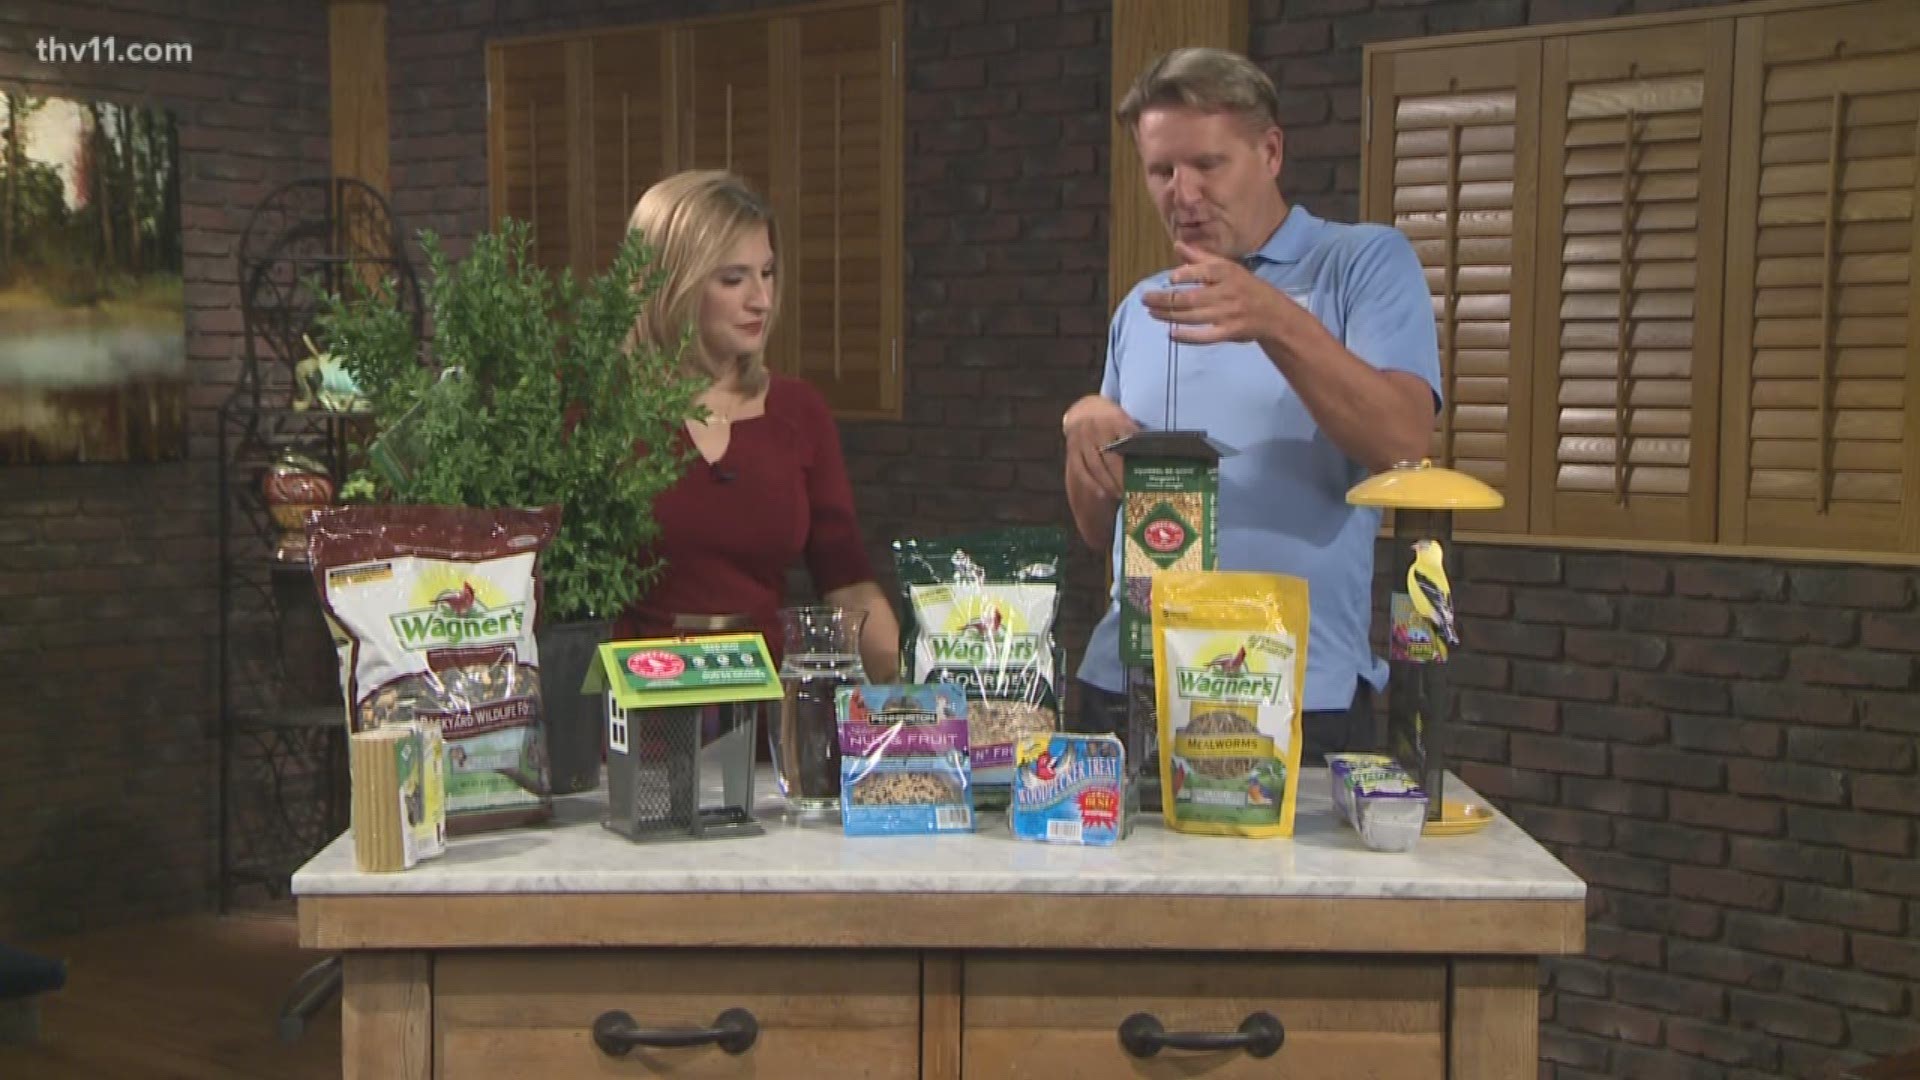 Chris H. Olsen shows us how to attract birds to your yard!